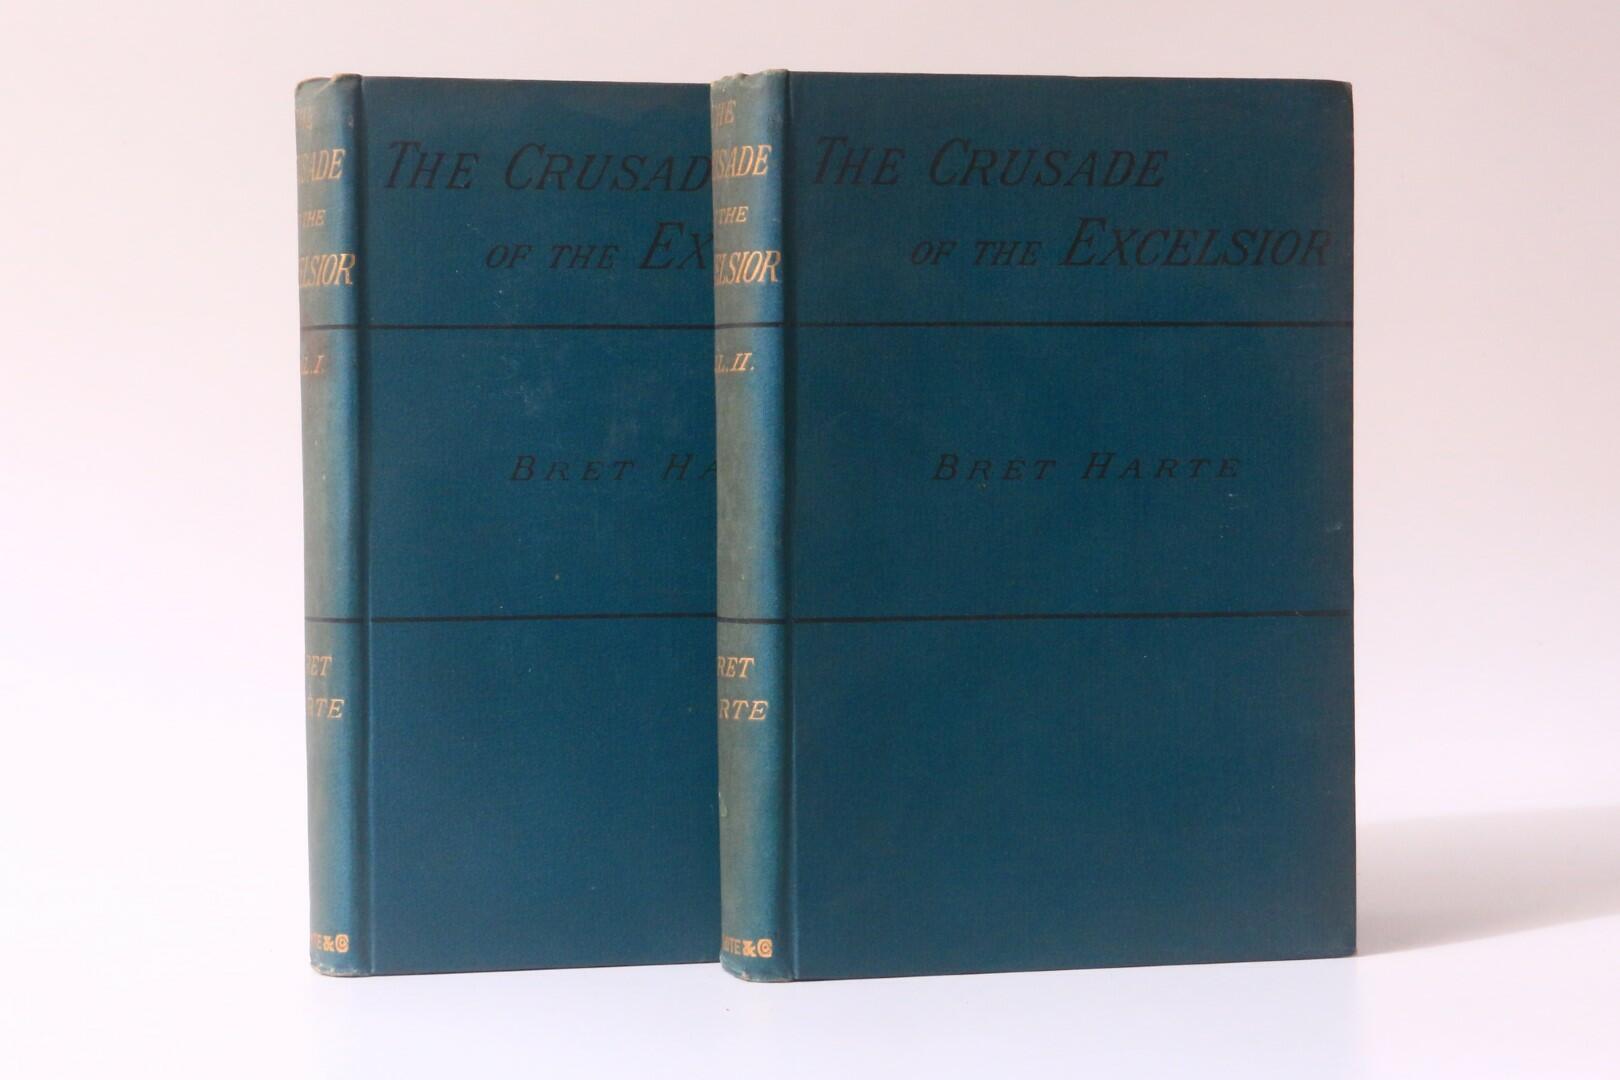 Bret Harte - The Crusade of the Excelsior - E.V. White, 1887, First Edition.